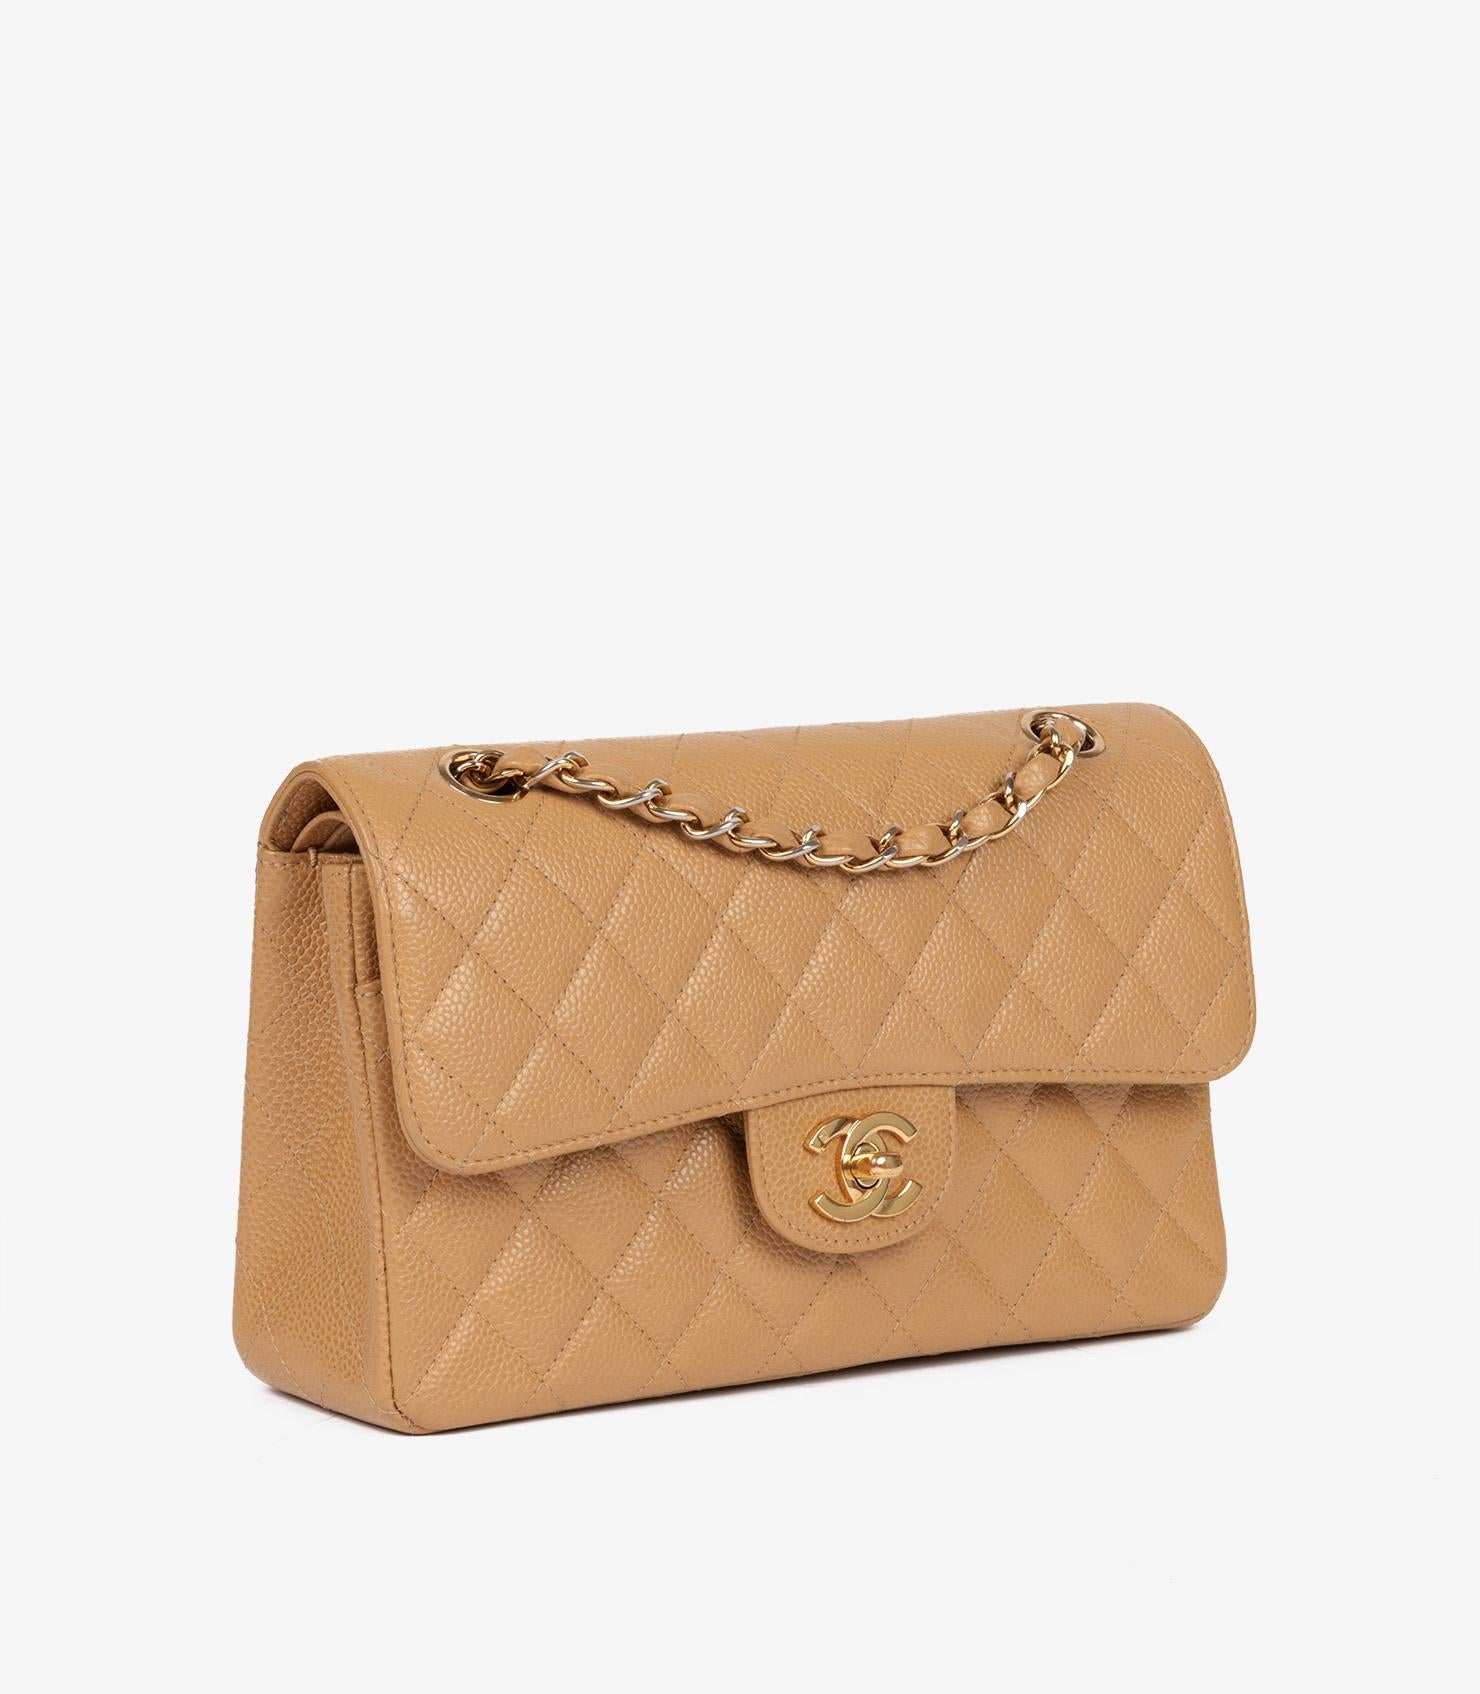 Chanel Dark Beige Quilted Caviar Leather Vintage Small Classic Double Flap Bag In Excellent Condition For Sale In Bishop's Stortford, Hertfordshire